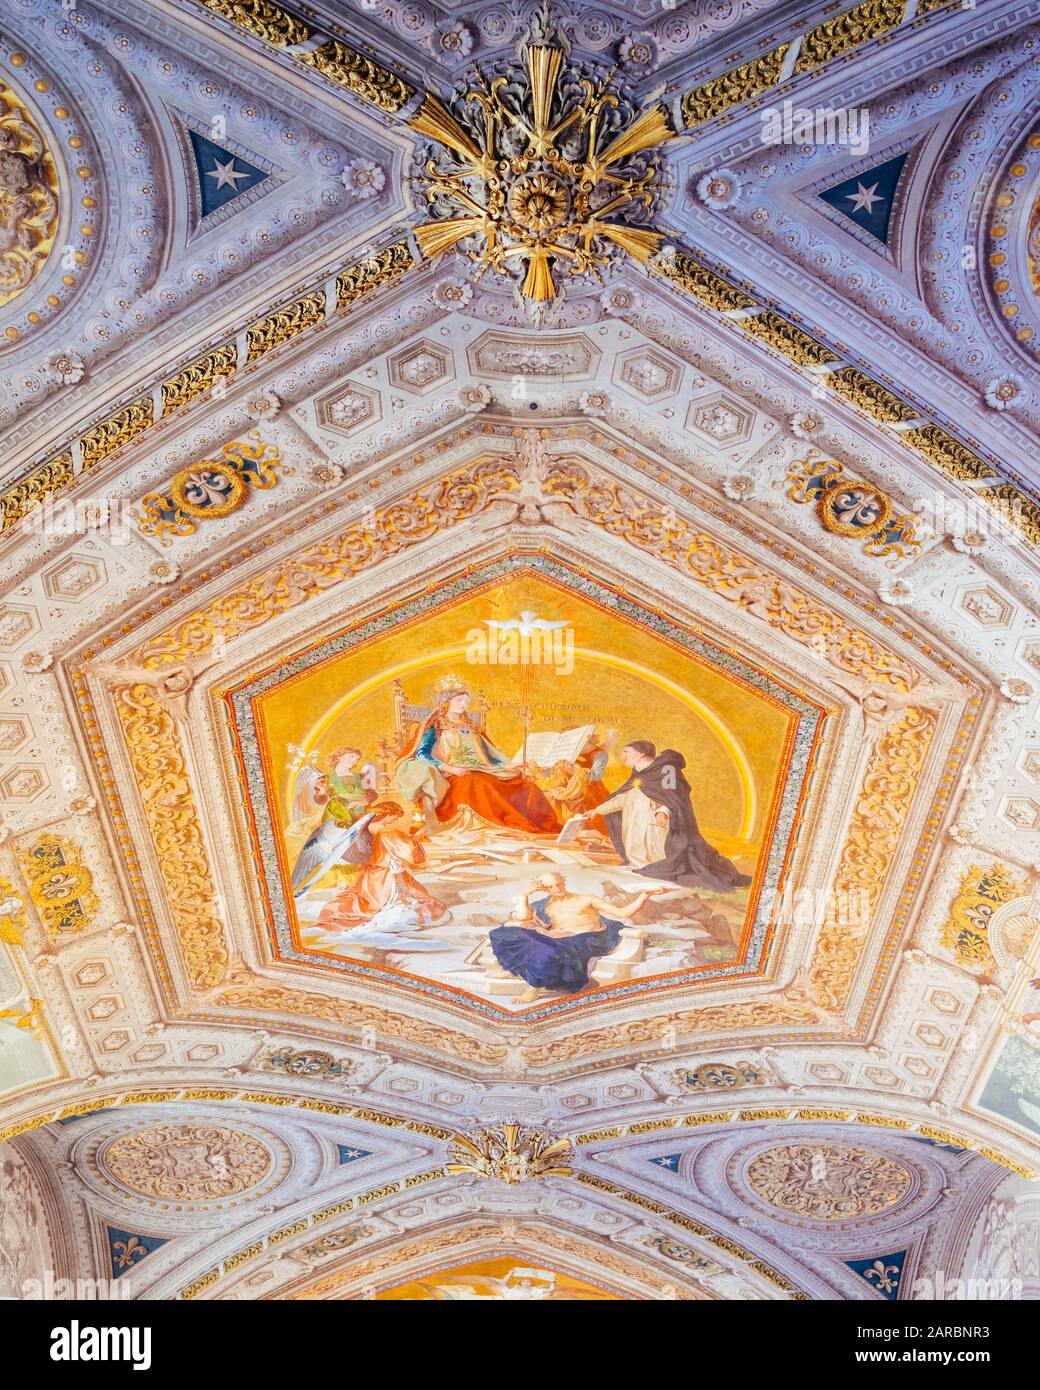 Rome, Italy - Jan 3, 2020: Beautiful ceiling art at the Vatican museum in Rome. Stock Photo